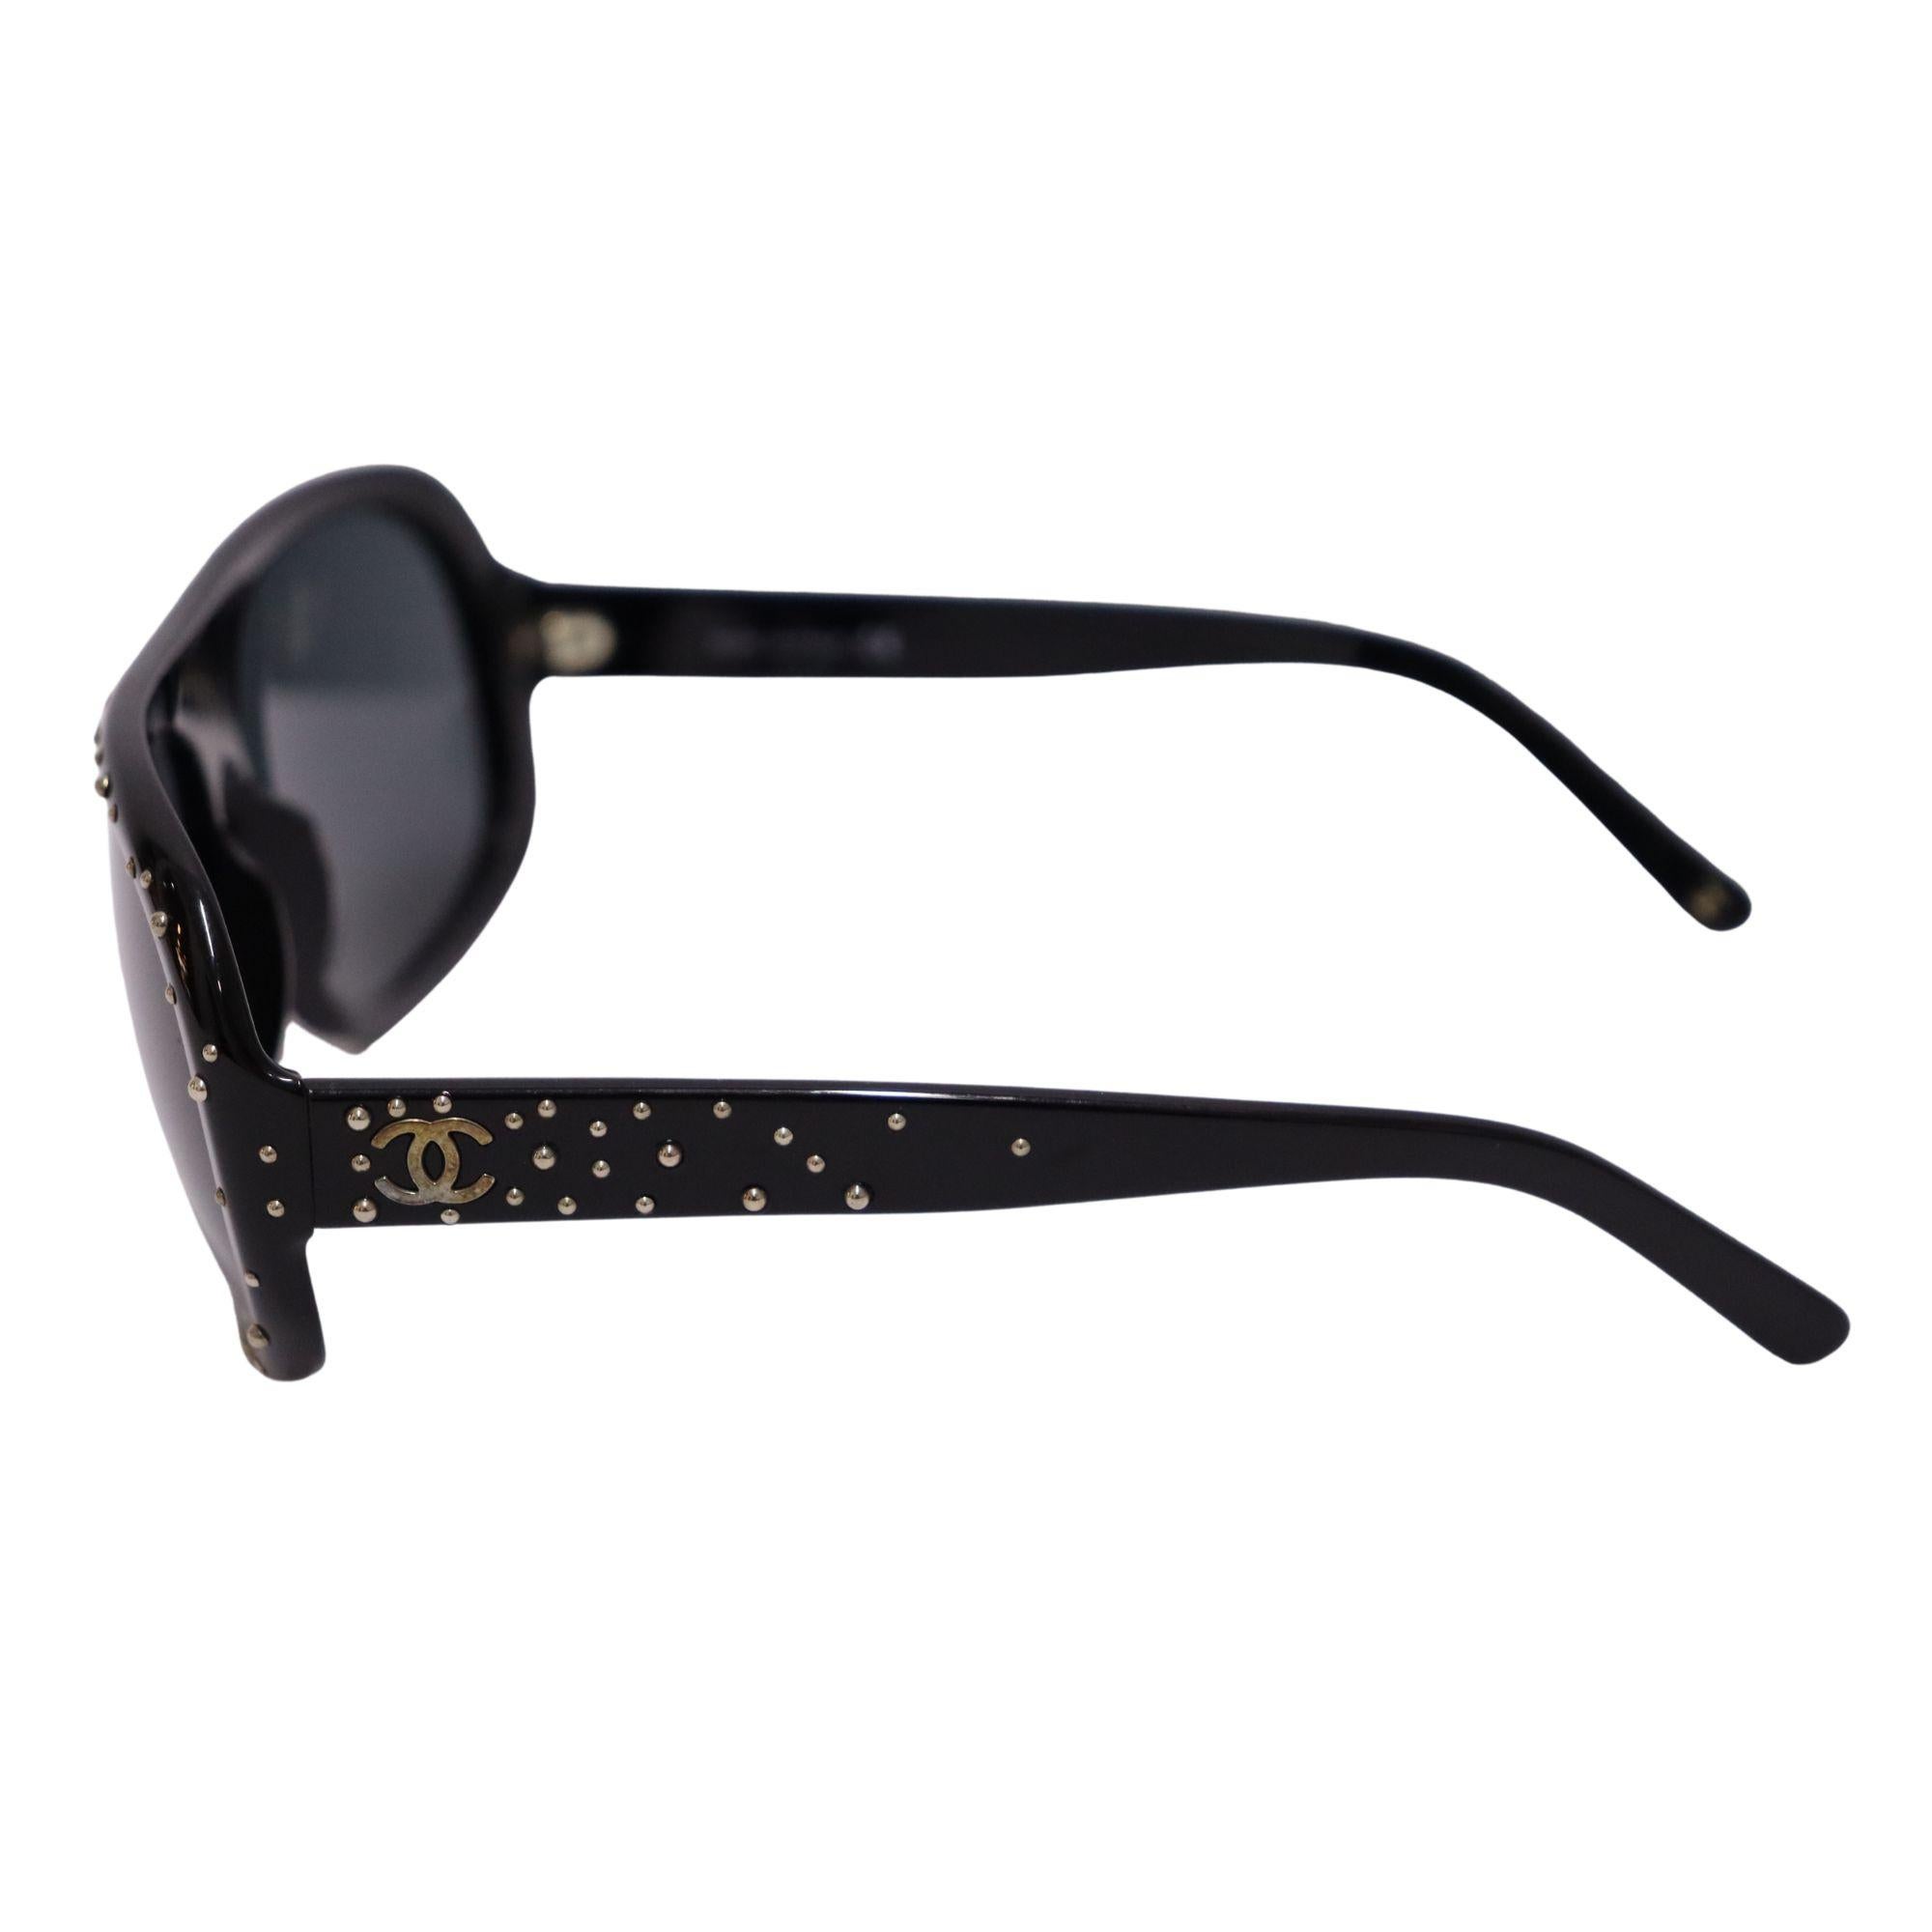 Black acetate Chanel aviator sunglasses with tinted lenses, strass embellishments at frames and temples featuring CC logos.
Size: 31/50/145
Overall condition: Very Good.
Interior condition: Signs of use.
External condition: Hardware color fade on